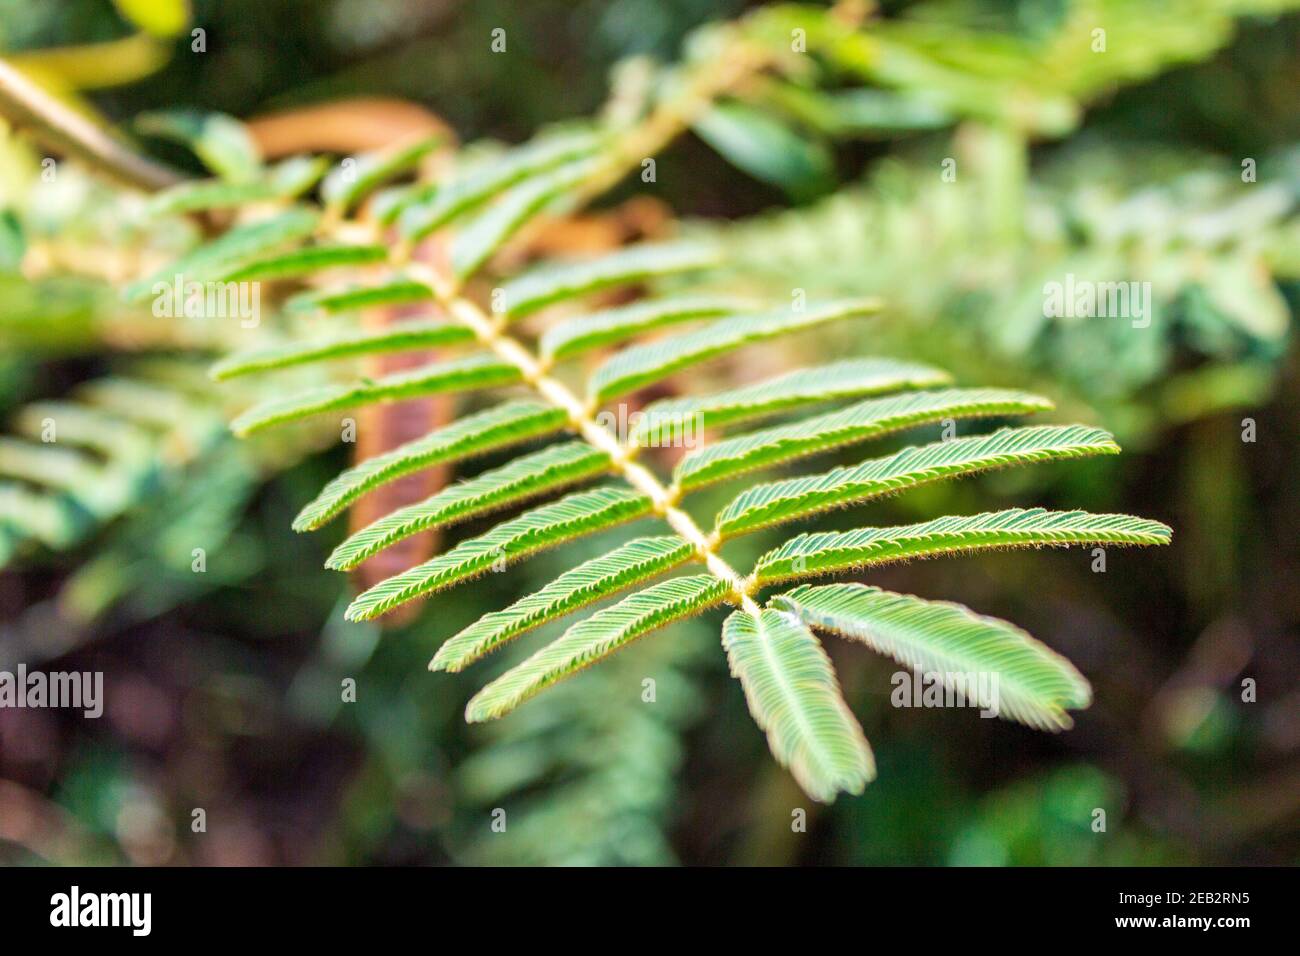 A touch me not plant with leaves fully extended. Shame-plant or sensitive plant Mimosa pudica has a fascinating reaction when touched. Stock Photo